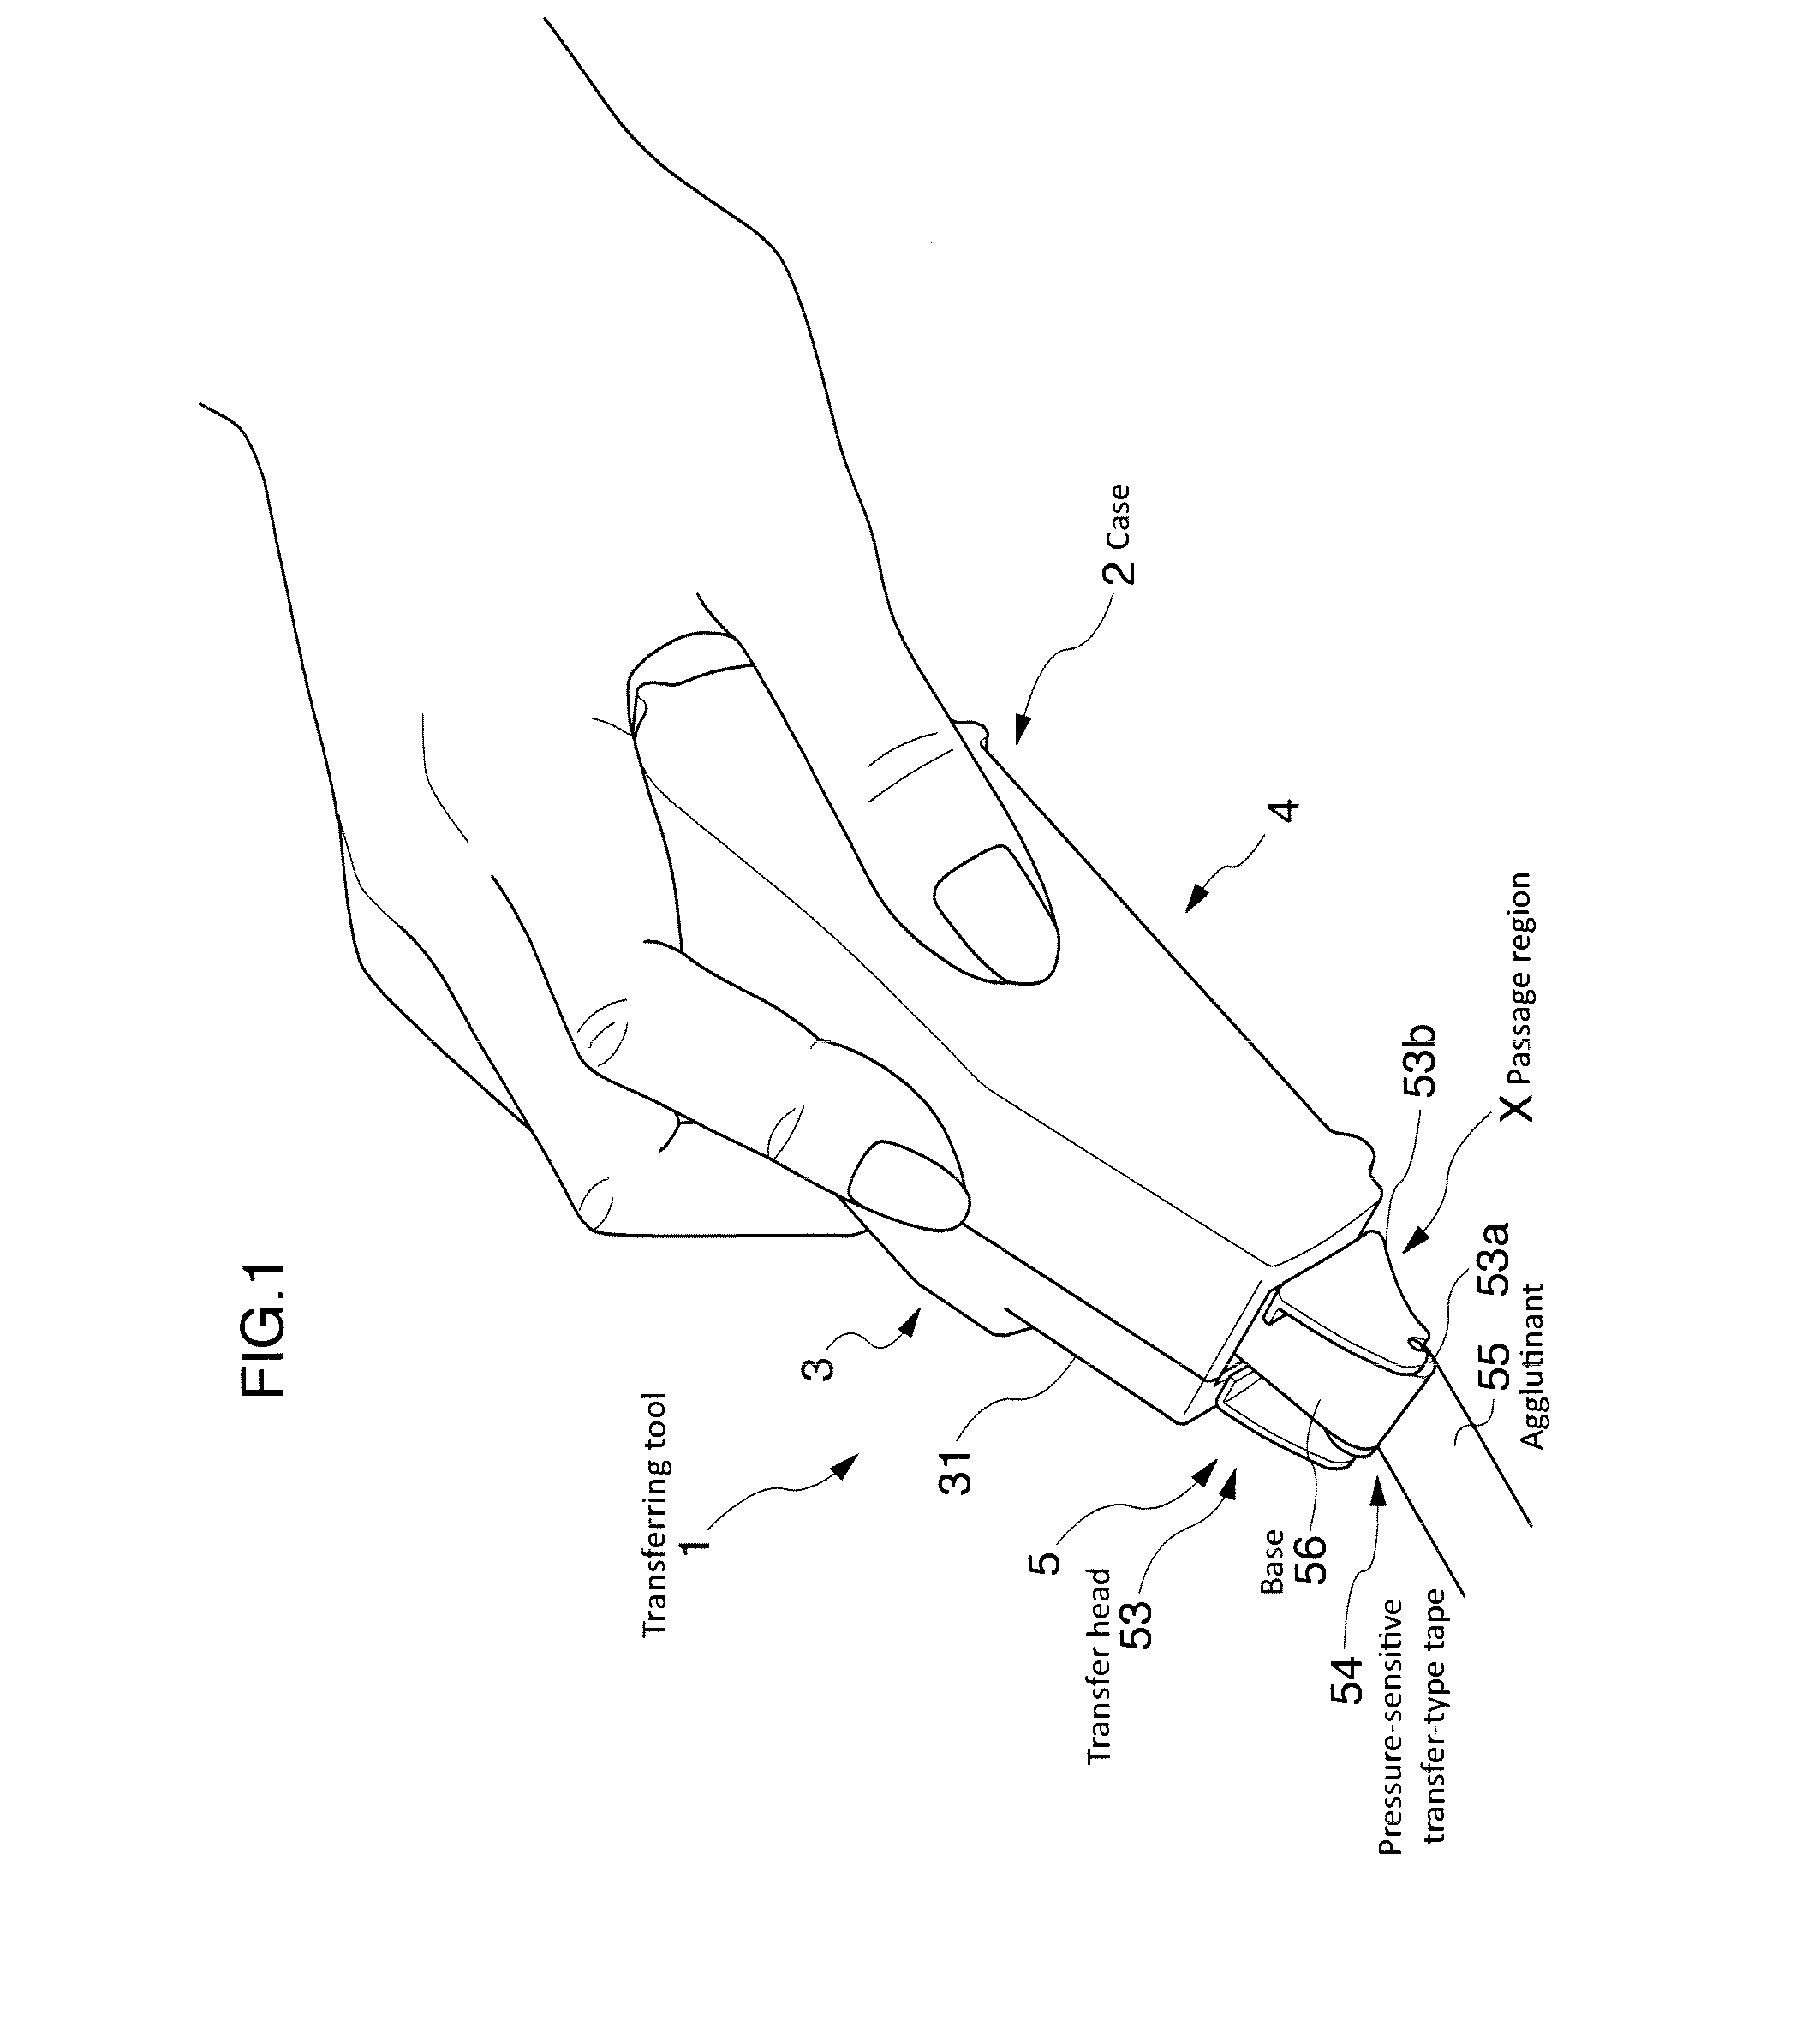 Application product and application system